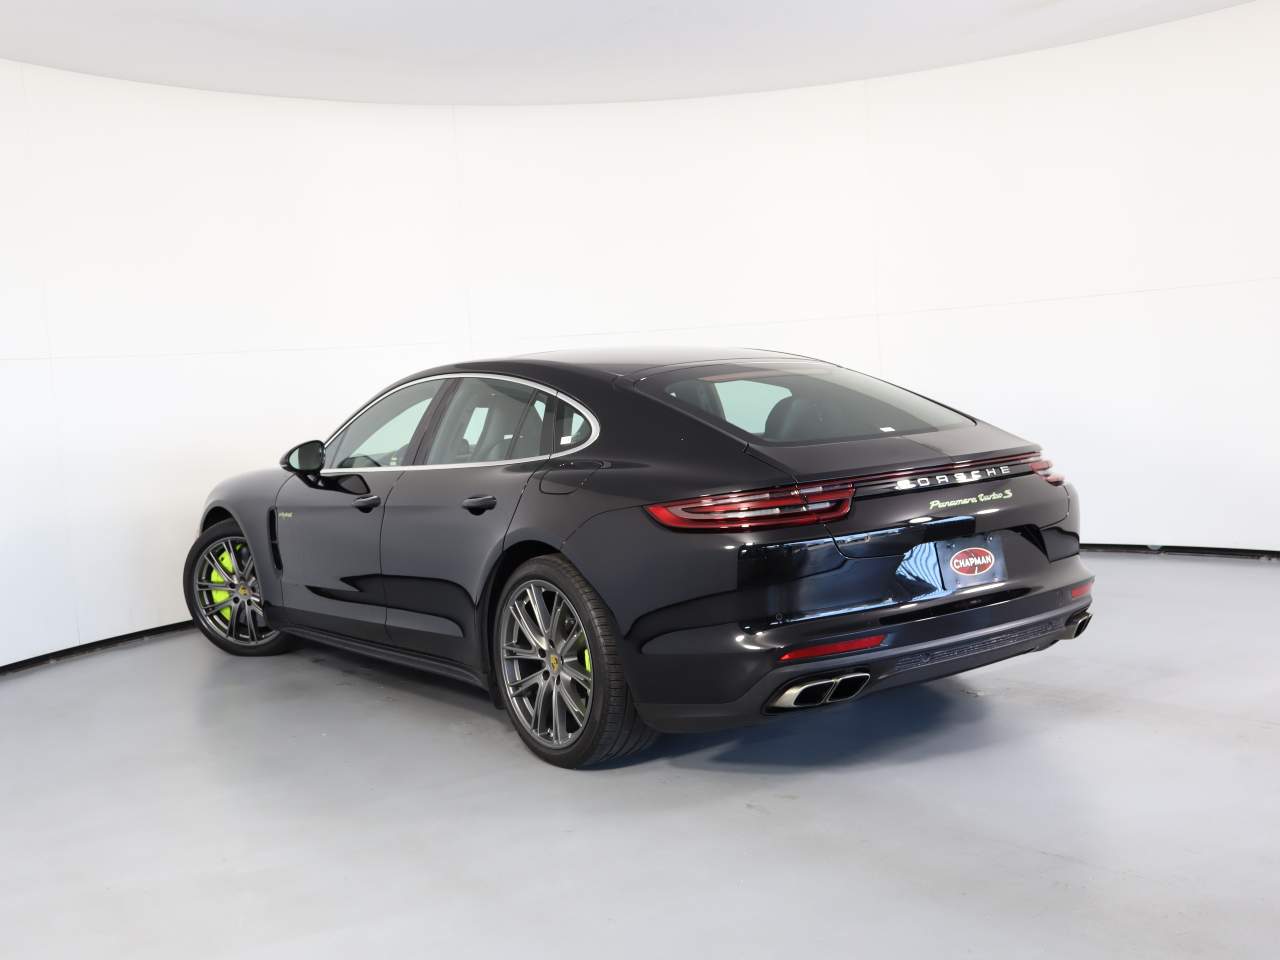 Used 2018 Porsche Panamera Turbo S E-Hybrid with VIN WP0AH2A74JL144848 for sale in Tucson, AZ